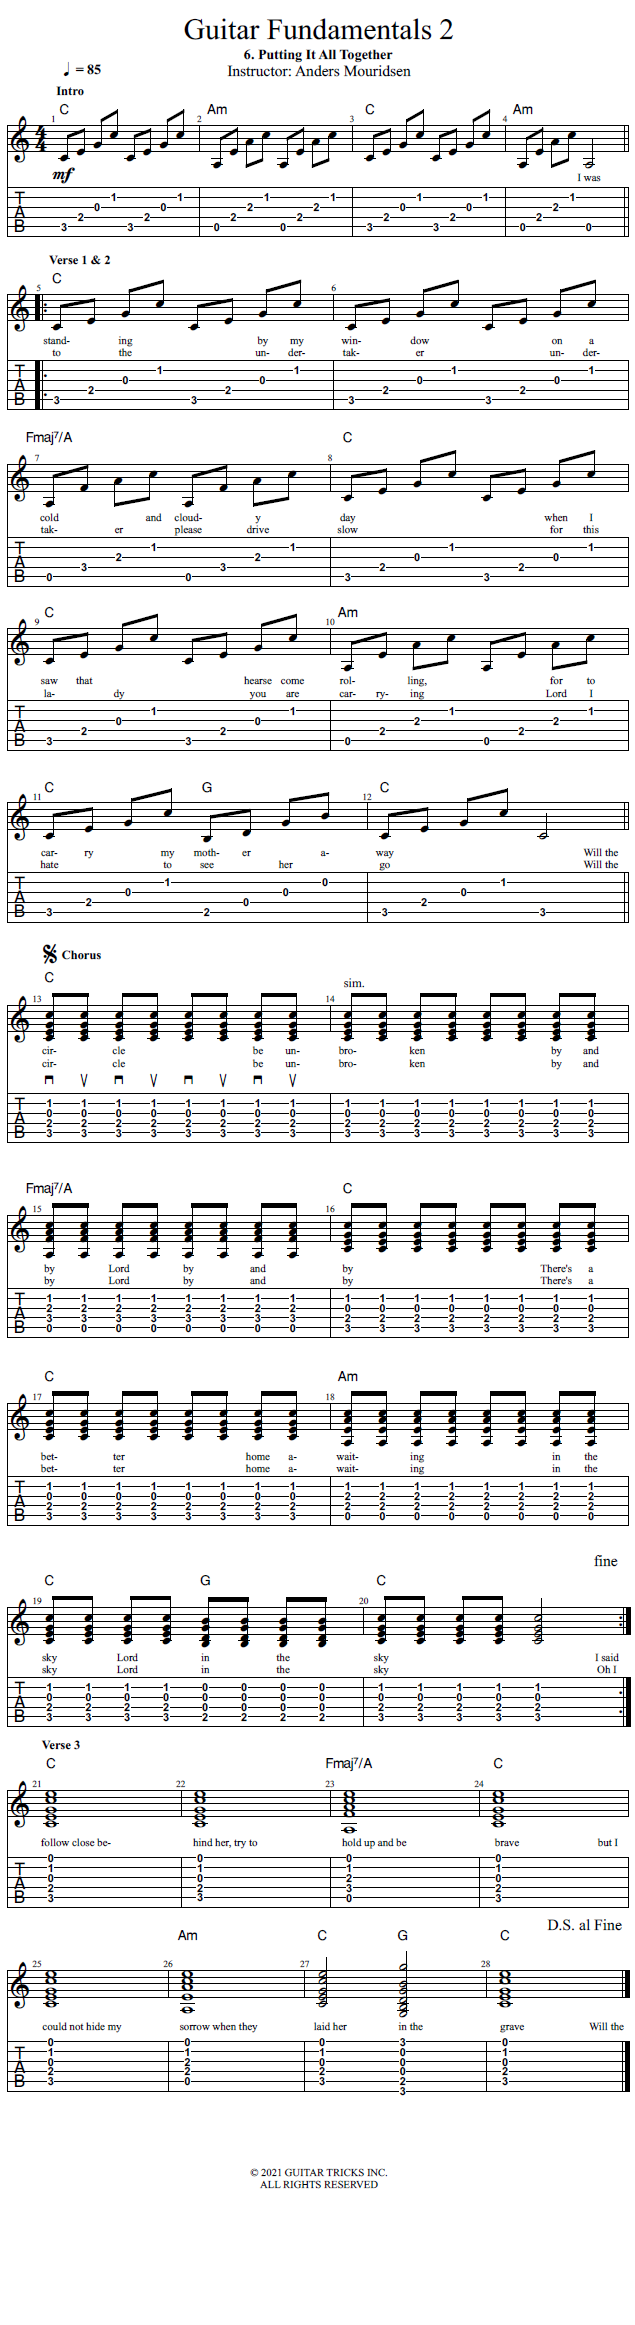 Putting It All Together song notation